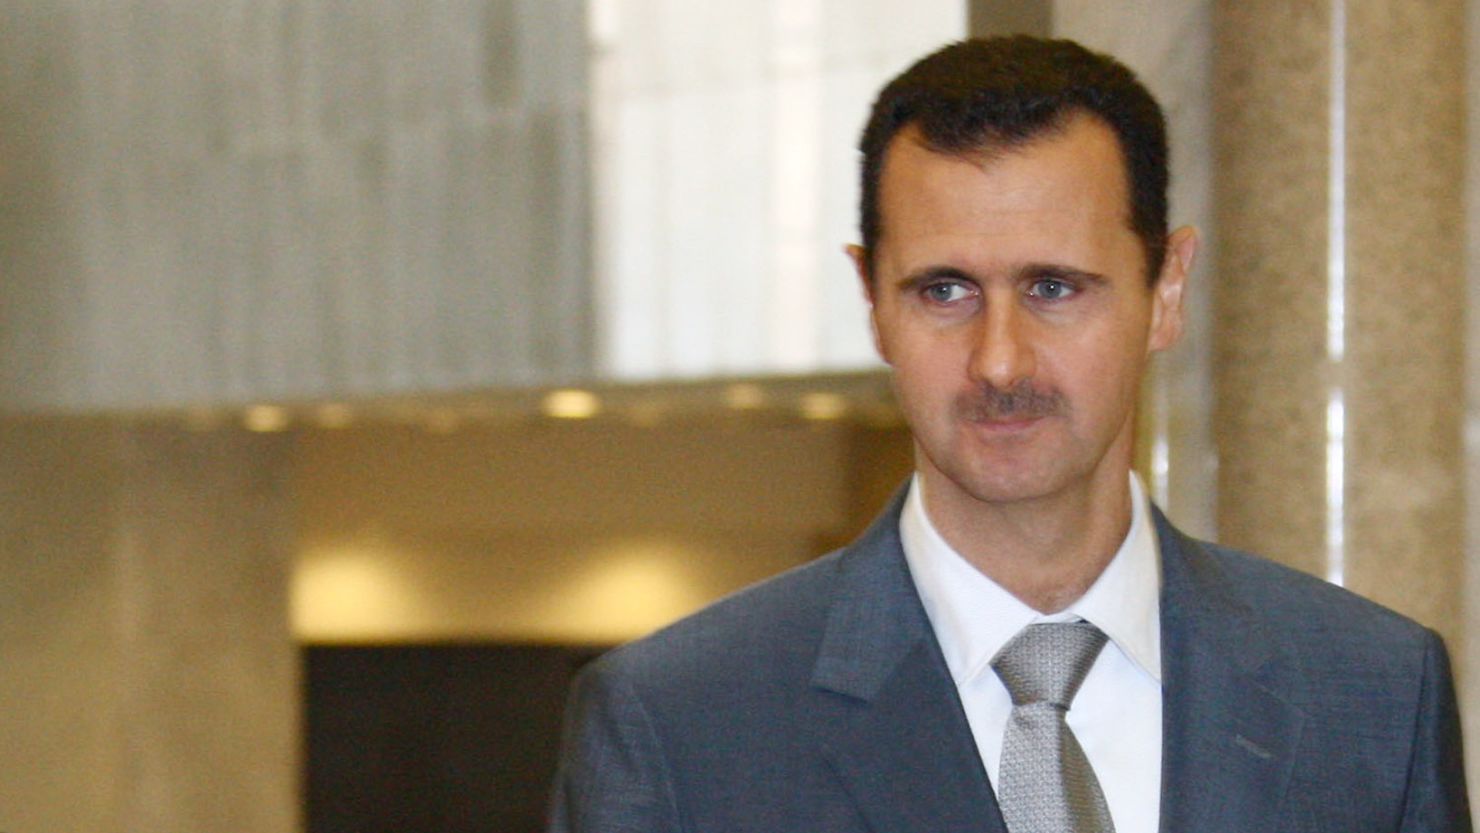 Syrian President Bashar al-Assad, seen in a file photo from July 6, 2008, says if his government falls, other countries in the region could suffer.